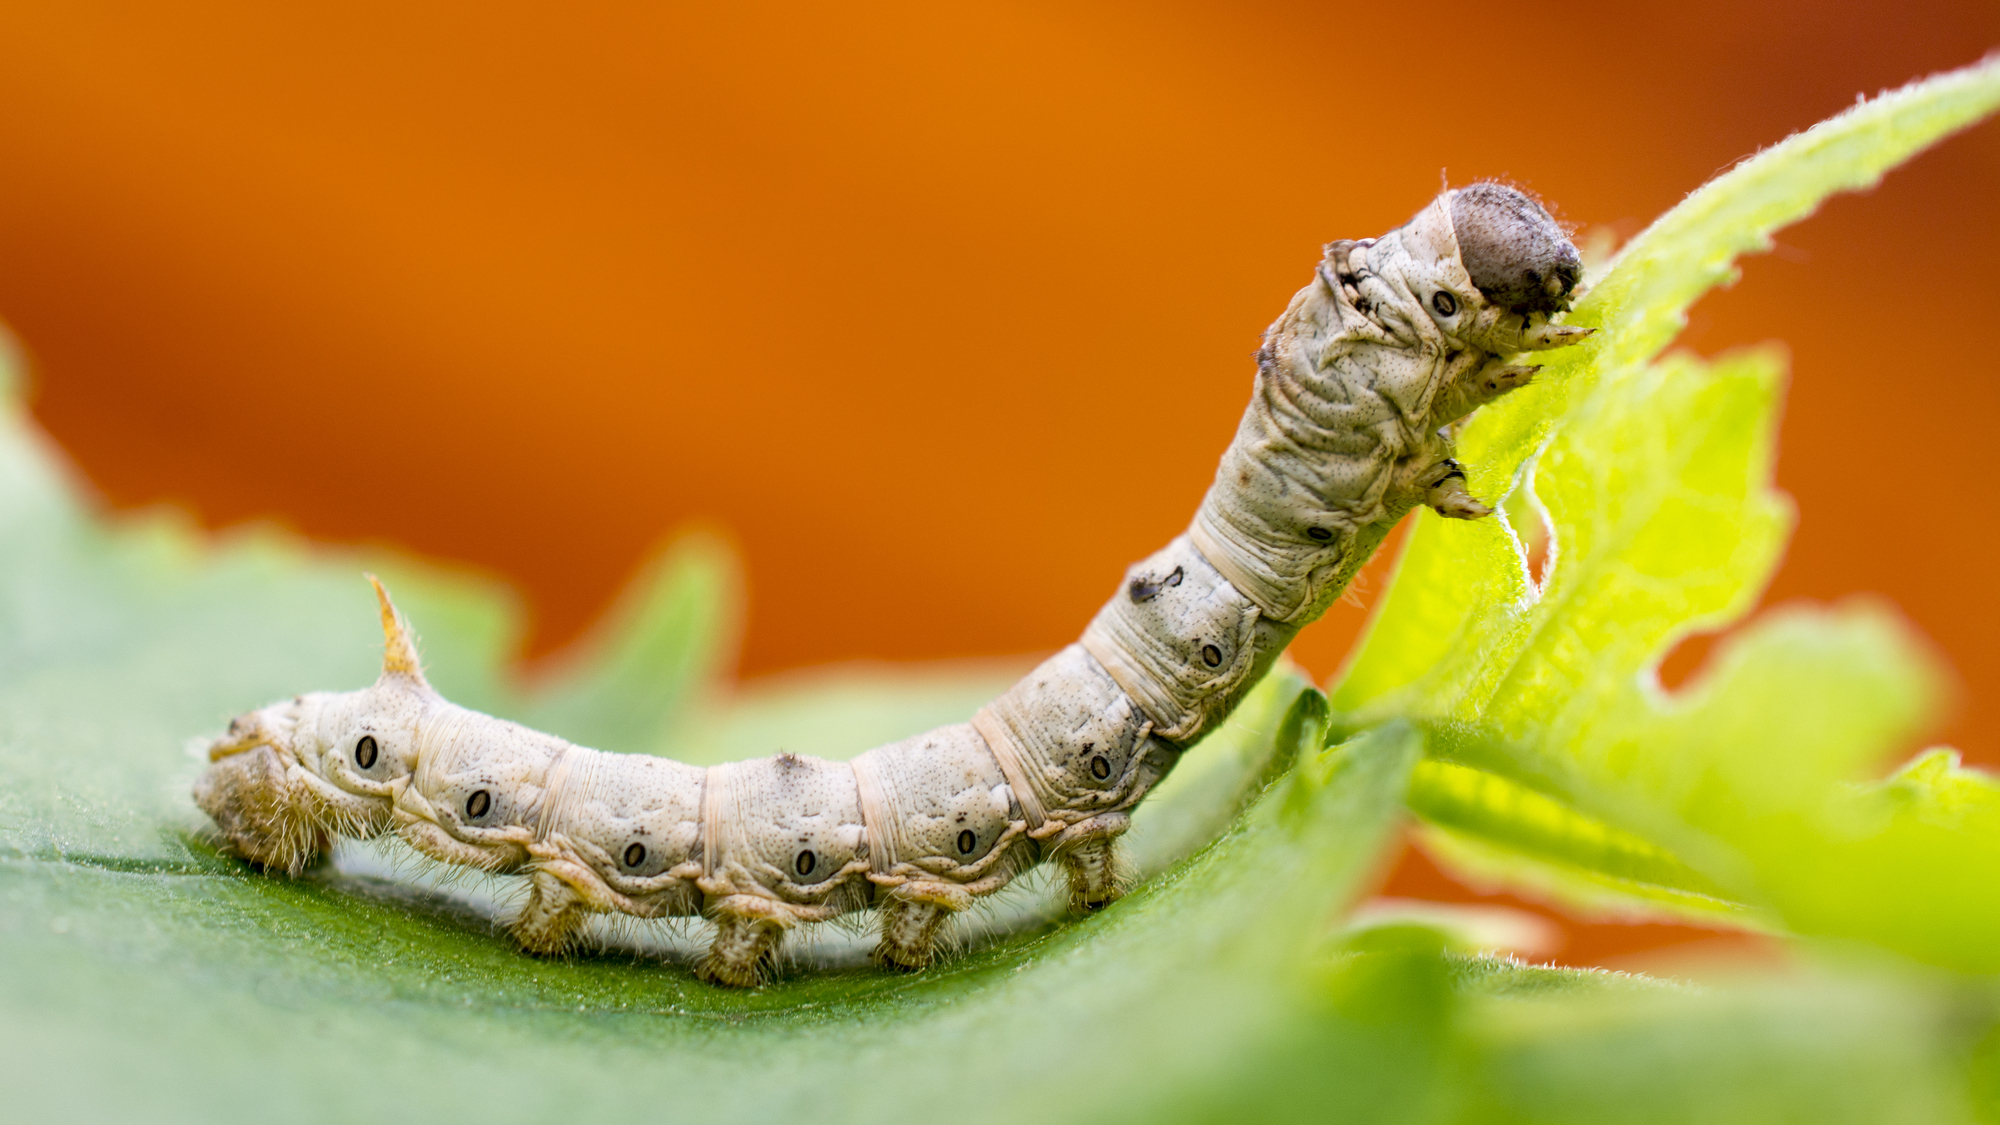 Macro photo of a silkworm eating a mulberry leaf